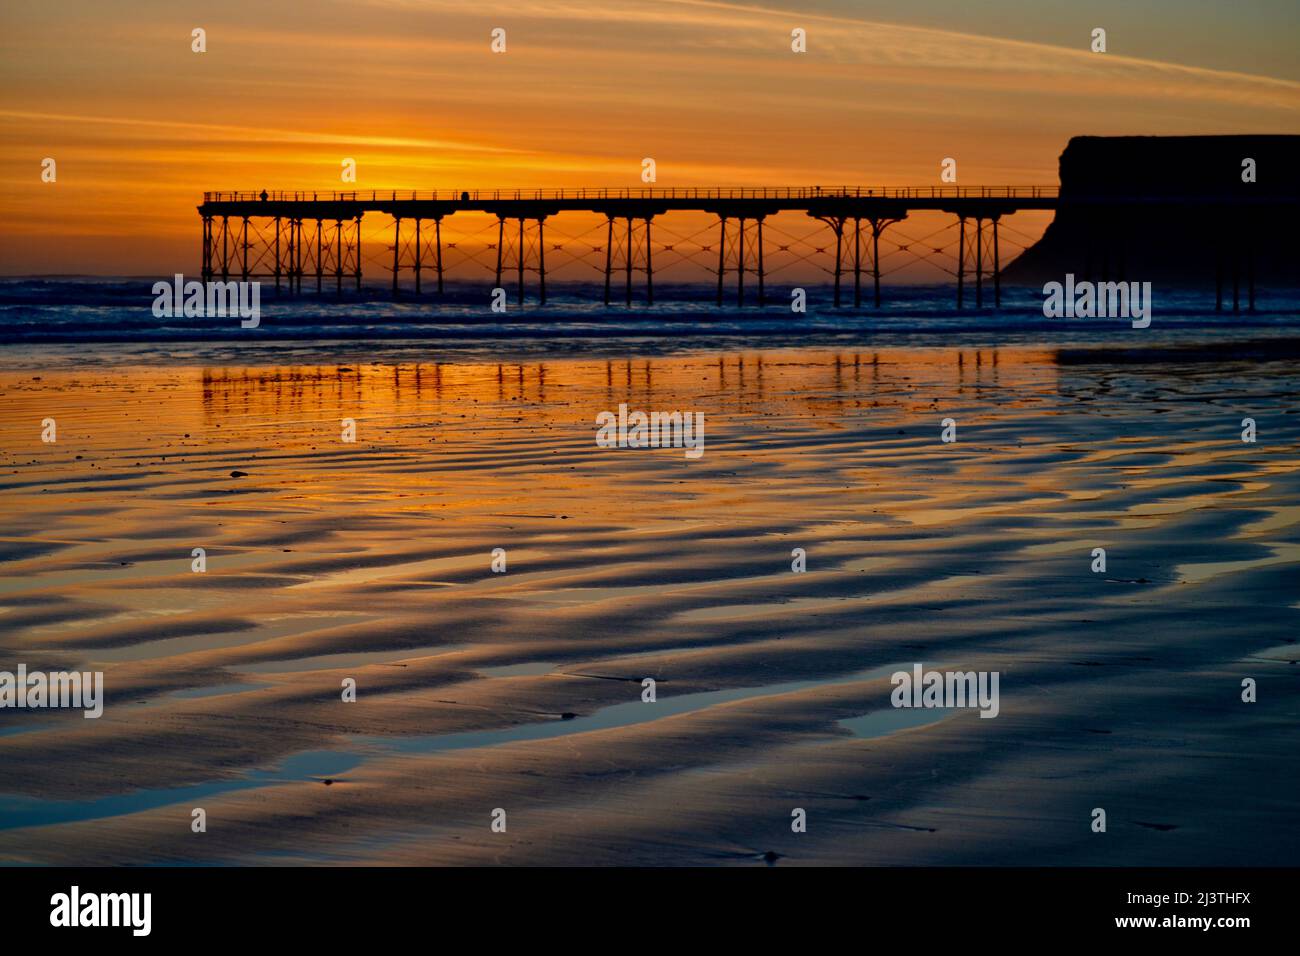 Stunning colourful image of a beautiful sunrise at Salburn Pier, Saltburn-By-The-Sea on the North Yorkshire coast, UK. Stock Photo